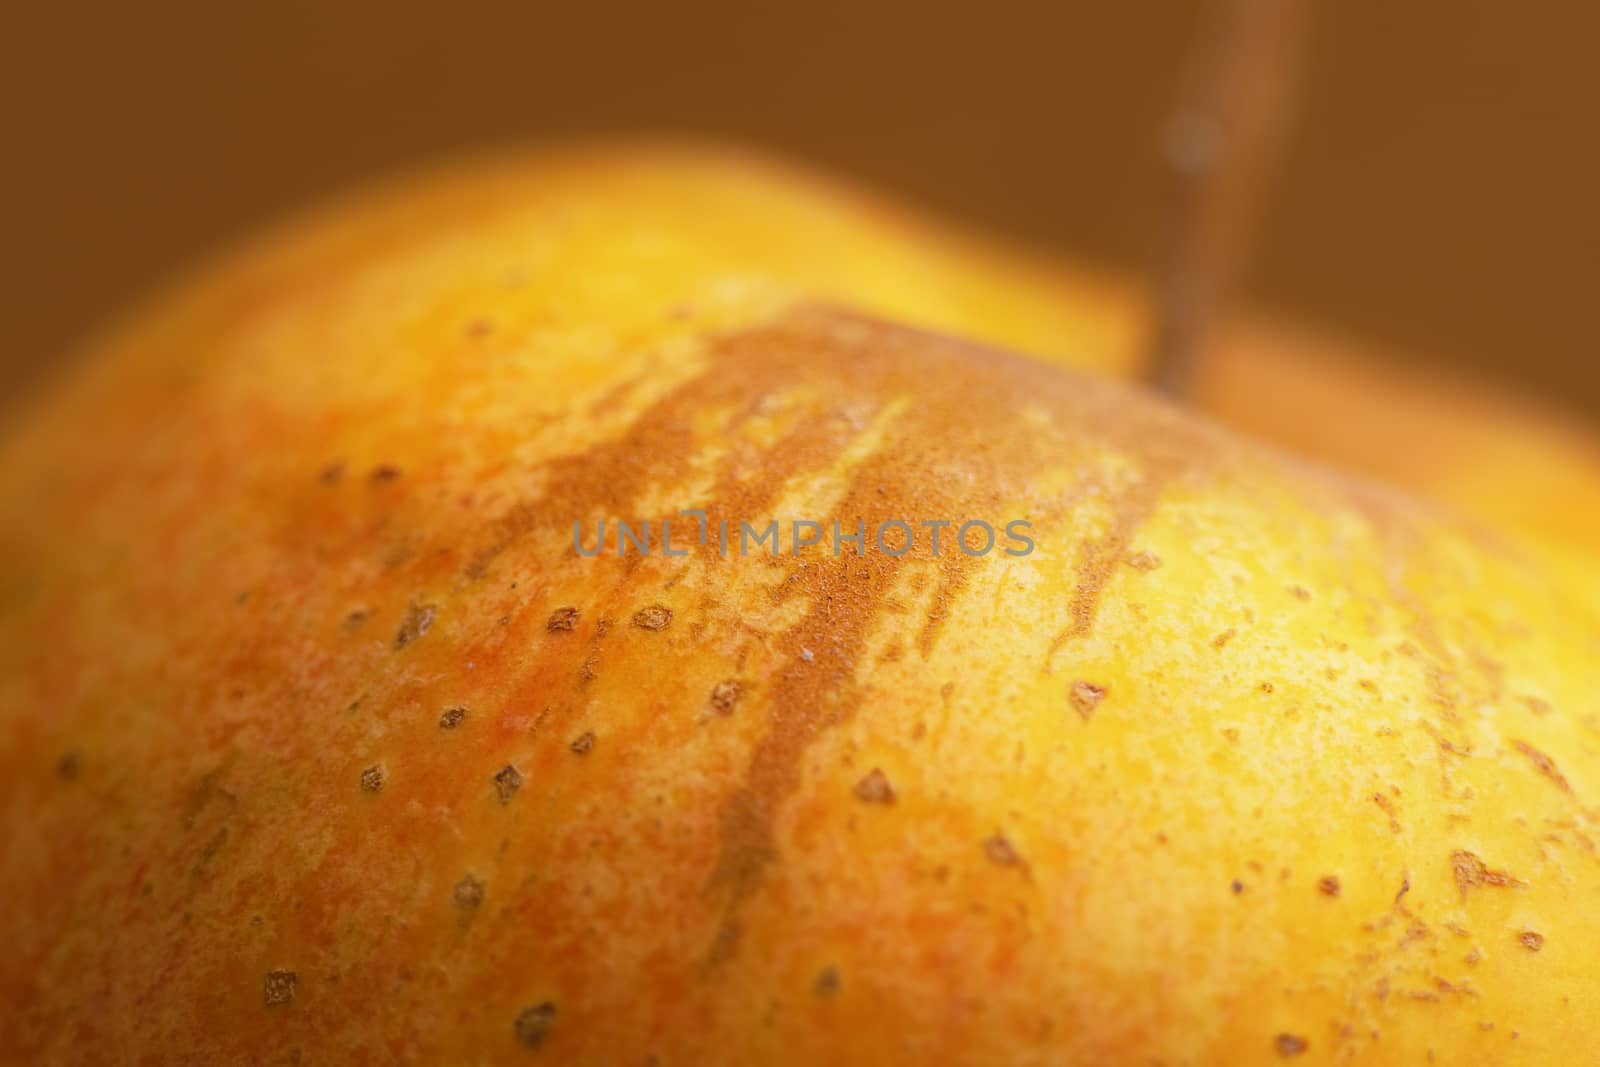 Yellow apple close-up. Fresh fruit with a stem.